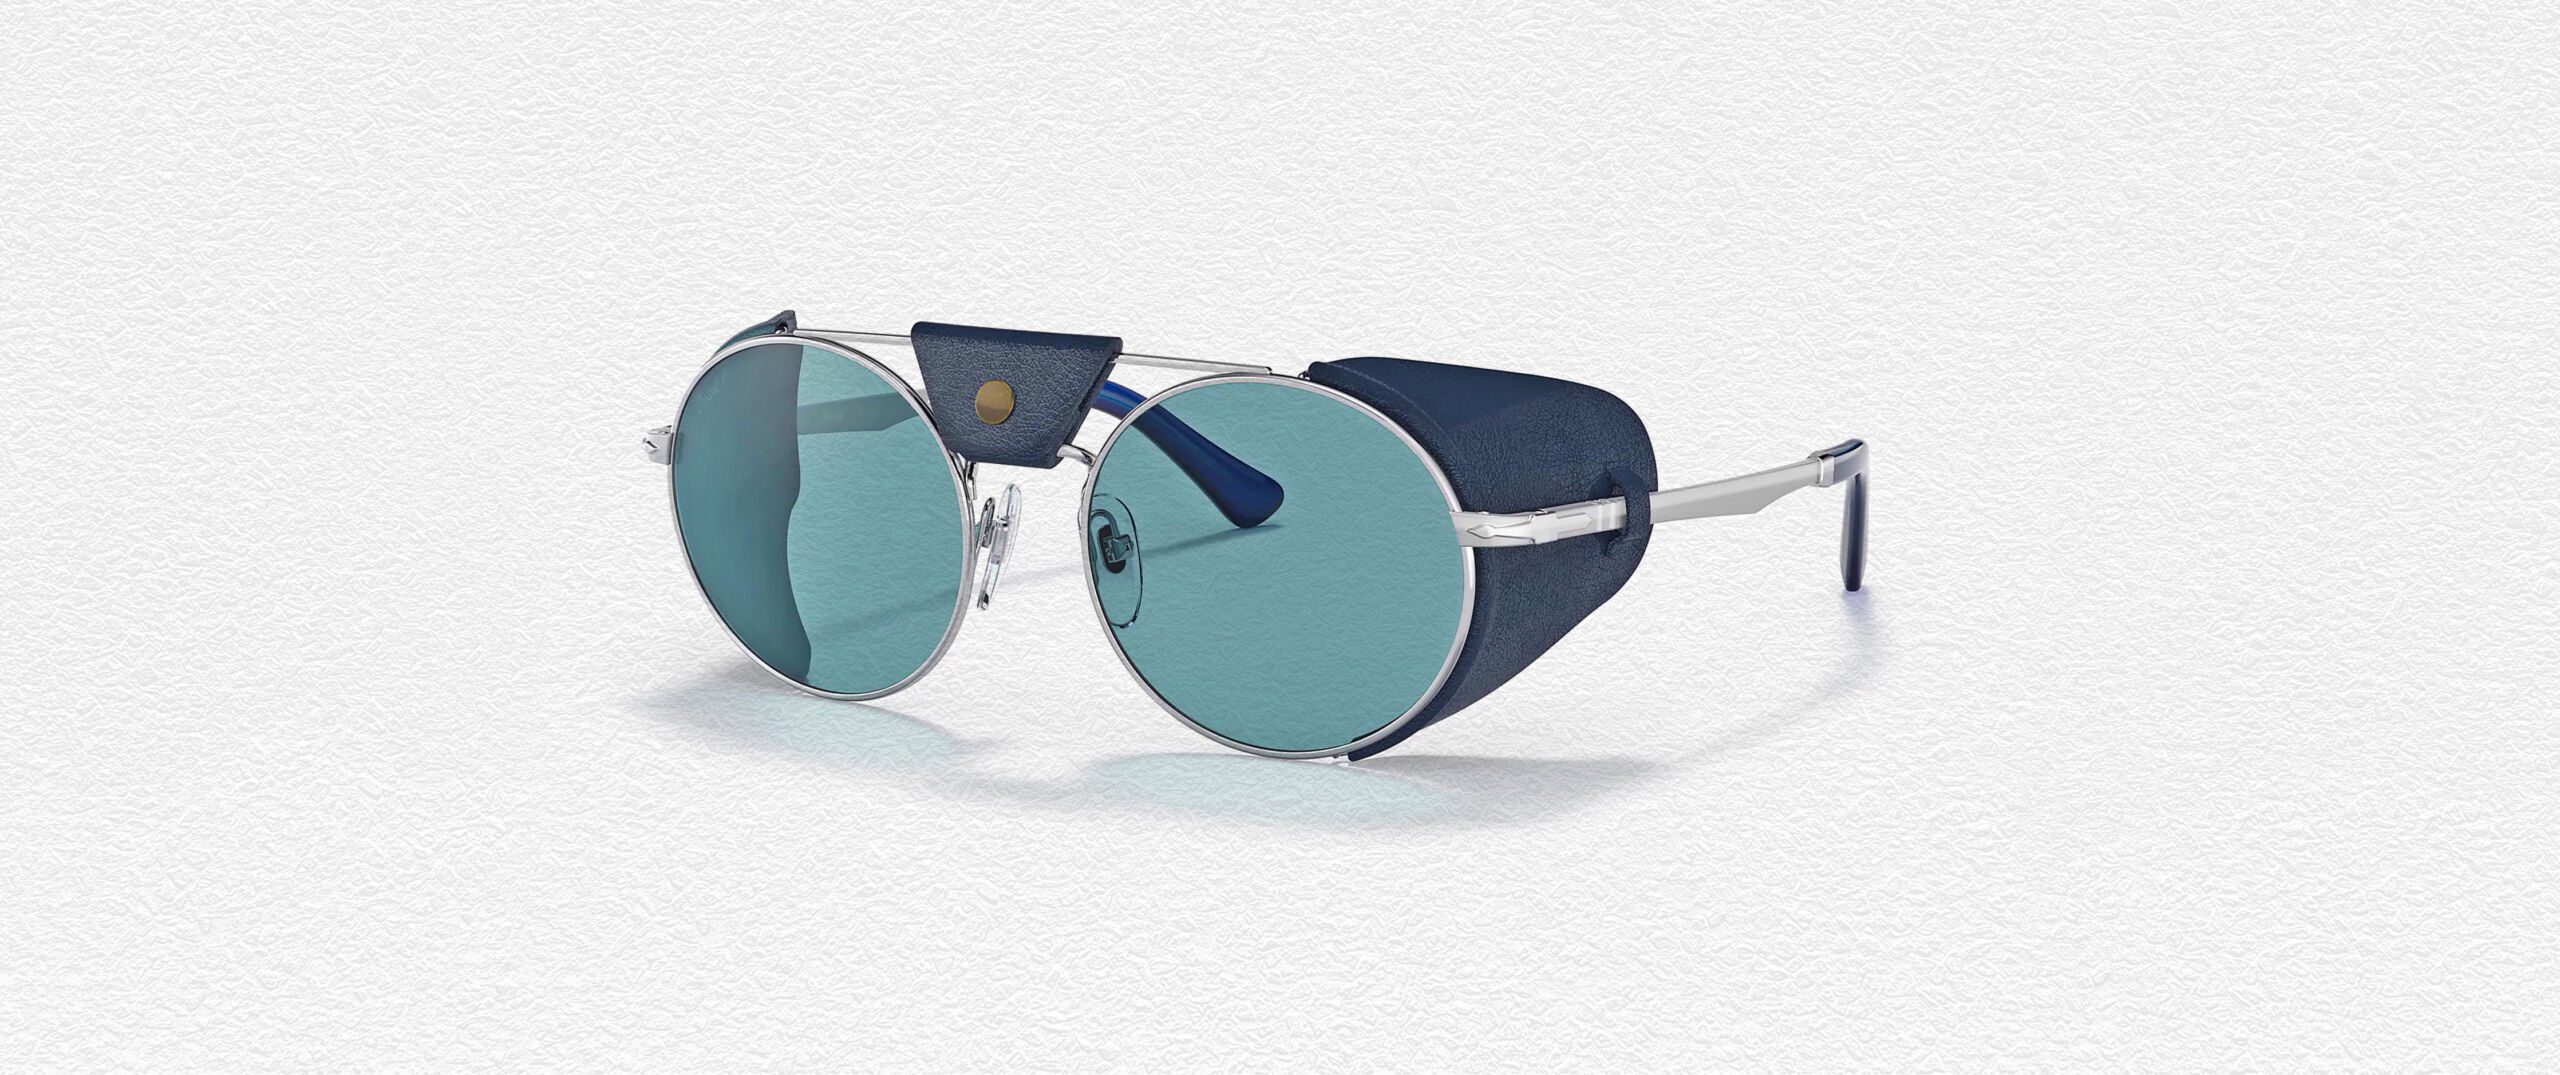 Gentleman\'s | Editor\'s Mercedes‑Maybach Sunglasses, Persol Journal Taylor\'s and Port Picks: